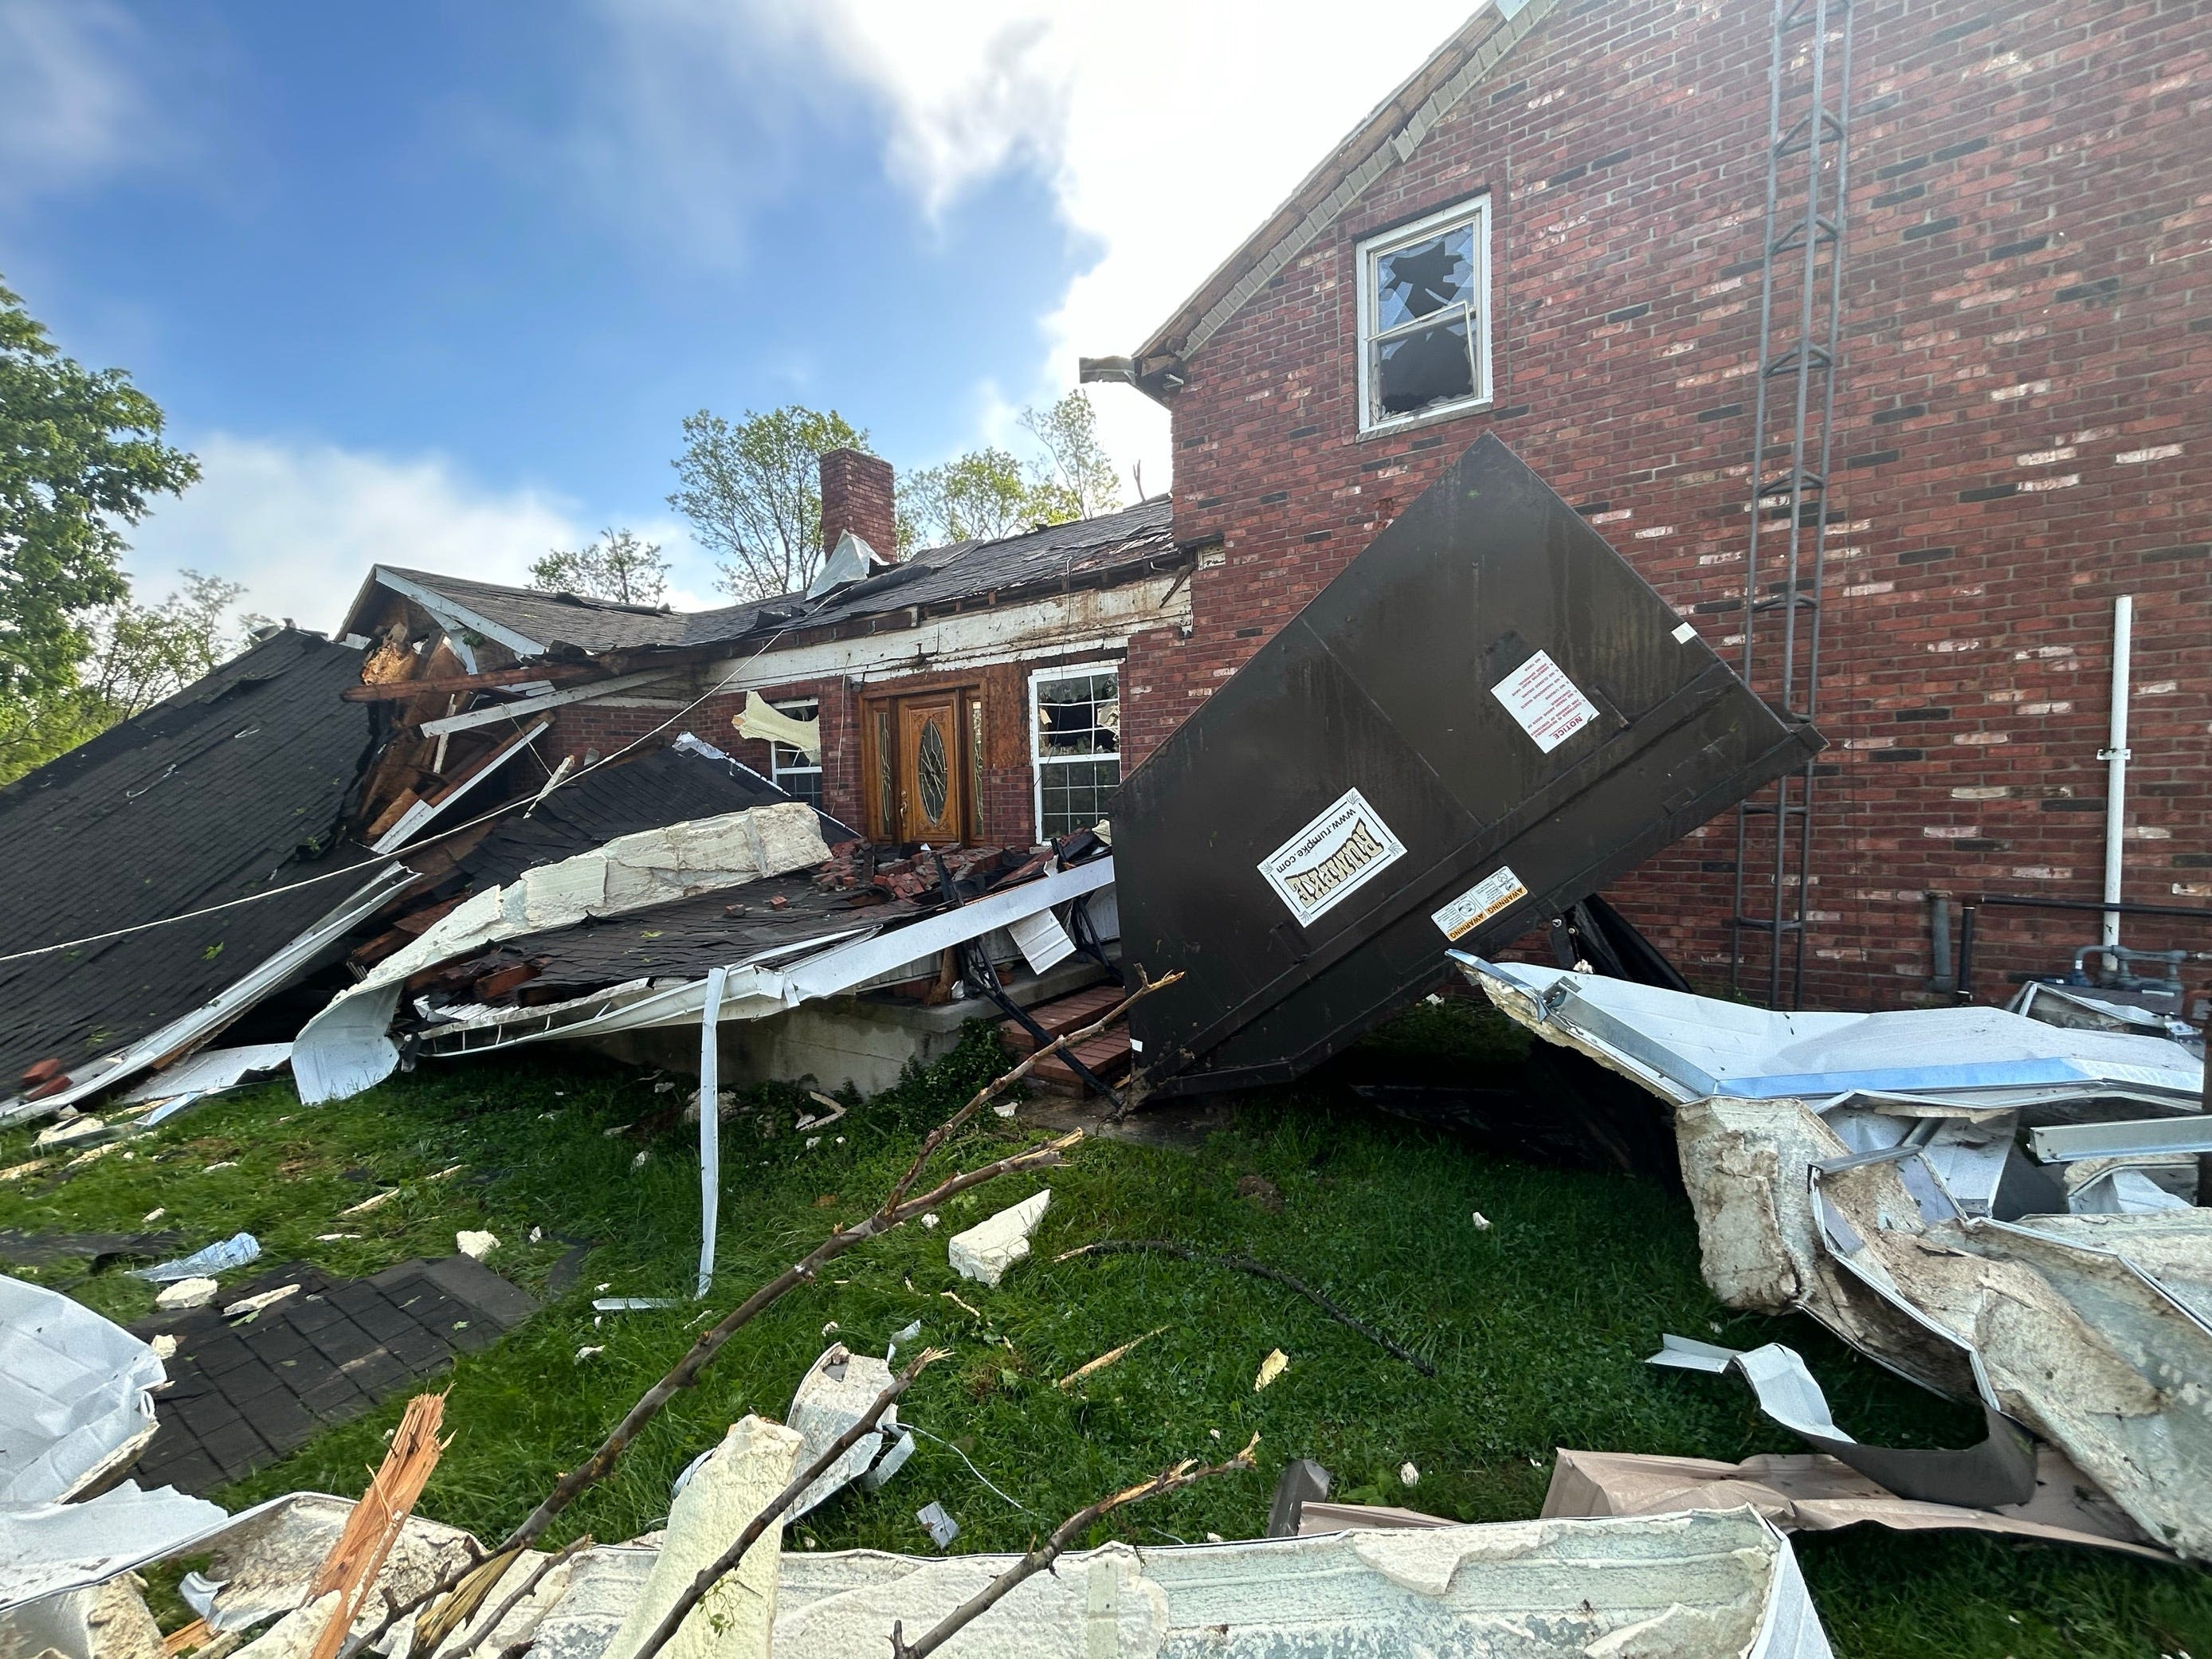 Where did tornadoes touch down in Ohio? National Weather Service confirms more than a dozen